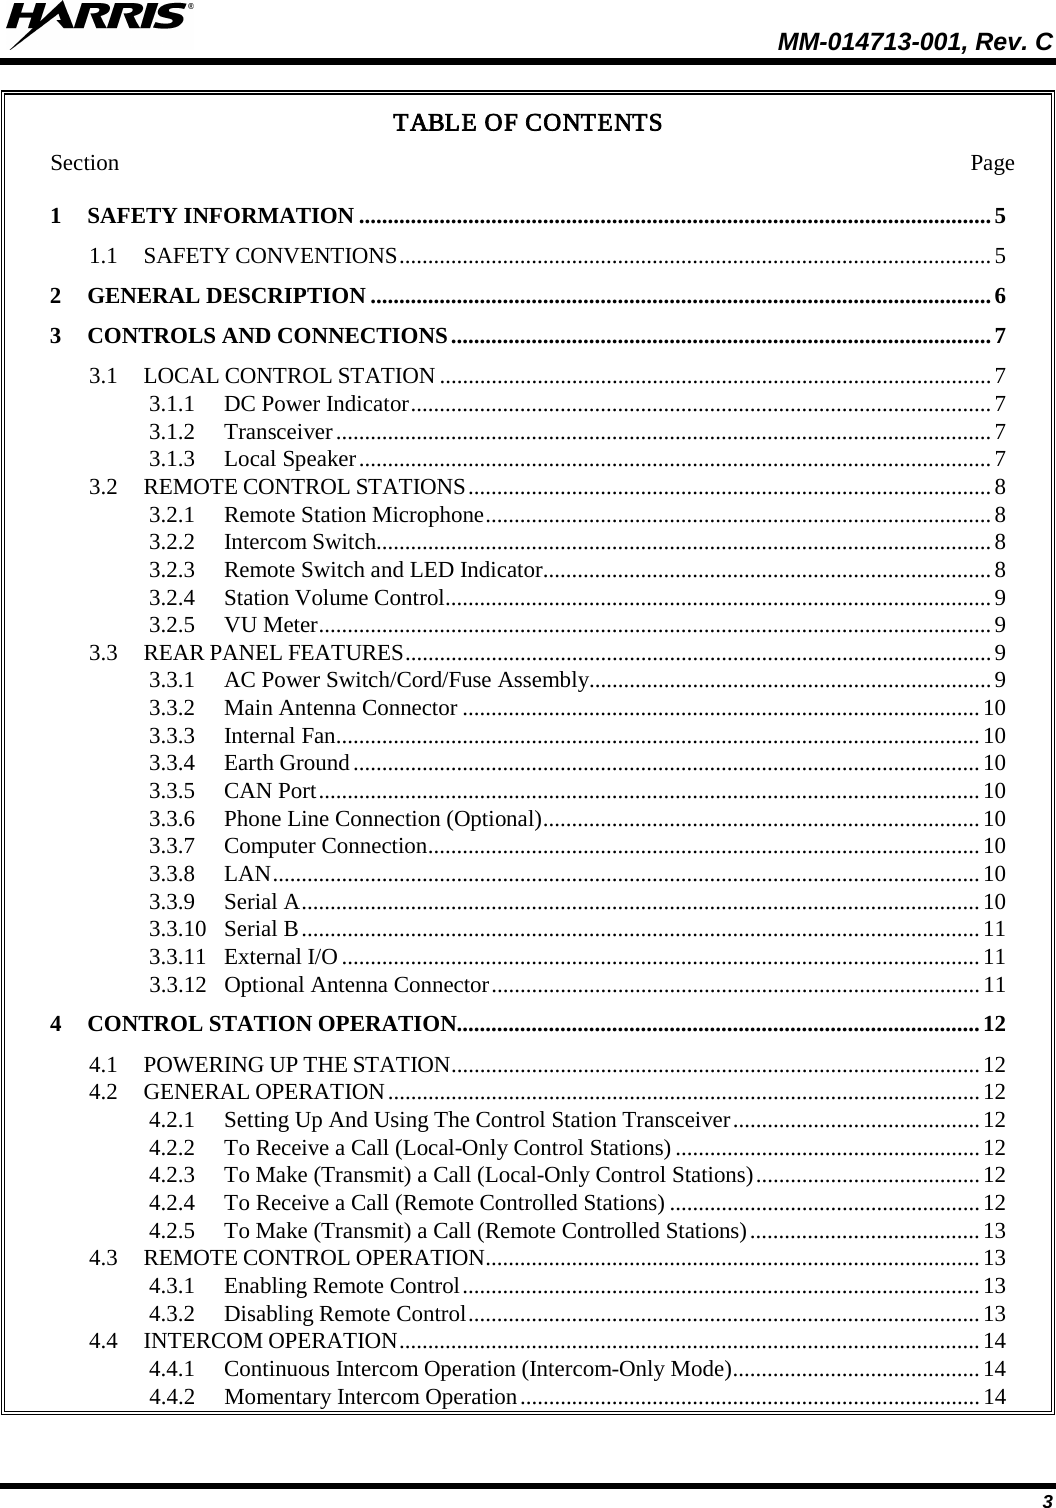  MM-014713-001, Rev. C   3 TABLE OF CONTENTS Section Page 1  SAFETY INFORMATION .............................................................................................................. 5 1.1  SAFETY CONVENTIONS ....................................................................................................... 5 2  GENERAL DESCRIPTION ............................................................................................................ 6 3  CONTROLS AND CONNECTIONS .............................................................................................. 7 3.1  LOCAL CONTROL STATION ................................................................................................ 7 3.1.1  DC Power Indicator ..................................................................................................... 7 3.1.2  Transceiver .................................................................................................................. 7 3.1.3  Local Speaker .............................................................................................................. 7 3.2  REMOTE CONTROL STATIONS ........................................................................................... 8 3.2.1  Remote Station Microphone ........................................................................................ 8 3.2.2  Intercom Switch........................................................................................................... 8 3.2.3  Remote Switch and LED Indicator .............................................................................. 8 3.2.4  Station Volume Control ............................................................................................... 9 3.2.5  VU Meter ..................................................................................................................... 9 3.3  REAR PANEL FEATURES ...................................................................................................... 9 3.3.1  AC Power Switch/Cord/Fuse Assembly...................................................................... 9 3.3.2  Main Antenna Connector .......................................................................................... 10 3.3.3  Internal Fan ................................................................................................................ 10 3.3.4  Earth Ground ............................................................................................................. 10 3.3.5  CAN Port ................................................................................................................... 10 3.3.6  Phone Line Connection (Optional) ............................................................................ 10 3.3.7  Computer Connection ................................................................................................ 10 3.3.8  LAN ........................................................................................................................... 10 3.3.9  Serial A ...................................................................................................................... 10 3.3.10  Serial B ...................................................................................................................... 11 3.3.11  External I/O ............................................................................................................... 11 3.3.12  Optional Antenna Connector ..................................................................................... 11 4  CONTROL STATION OPERATION........................................................................................... 12 4.1  POWERING UP THE STATION ............................................................................................ 12 4.2  GENERAL OPERATION ....................................................................................................... 12 4.2.1  Setting Up And Using The Control Station Transceiver ........................................... 12 4.2.2  To Receive a Call (Local-Only Control Stations) ..................................................... 12 4.2.3  To Make (Transmit) a Call (Local-Only Control Stations) ....................................... 12 4.2.4  To Receive a Call (Remote Controlled Stations) ...................................................... 12 4.2.5  To Make (Transmit) a Call (Remote Controlled Stations) ........................................ 13 4.3  REMOTE CONTROL OPERATION ...................................................................................... 13 4.3.1  Enabling Remote Control .......................................................................................... 13 4.3.2  Disabling Remote Control ......................................................................................... 13 4.4  INTERCOM OPERATION ..................................................................................................... 14 4.4.1  Continuous Intercom Operation (Intercom-Only Mode) ........................................... 14 4.4.2  Momentary Intercom Operation ................................................................................ 14 